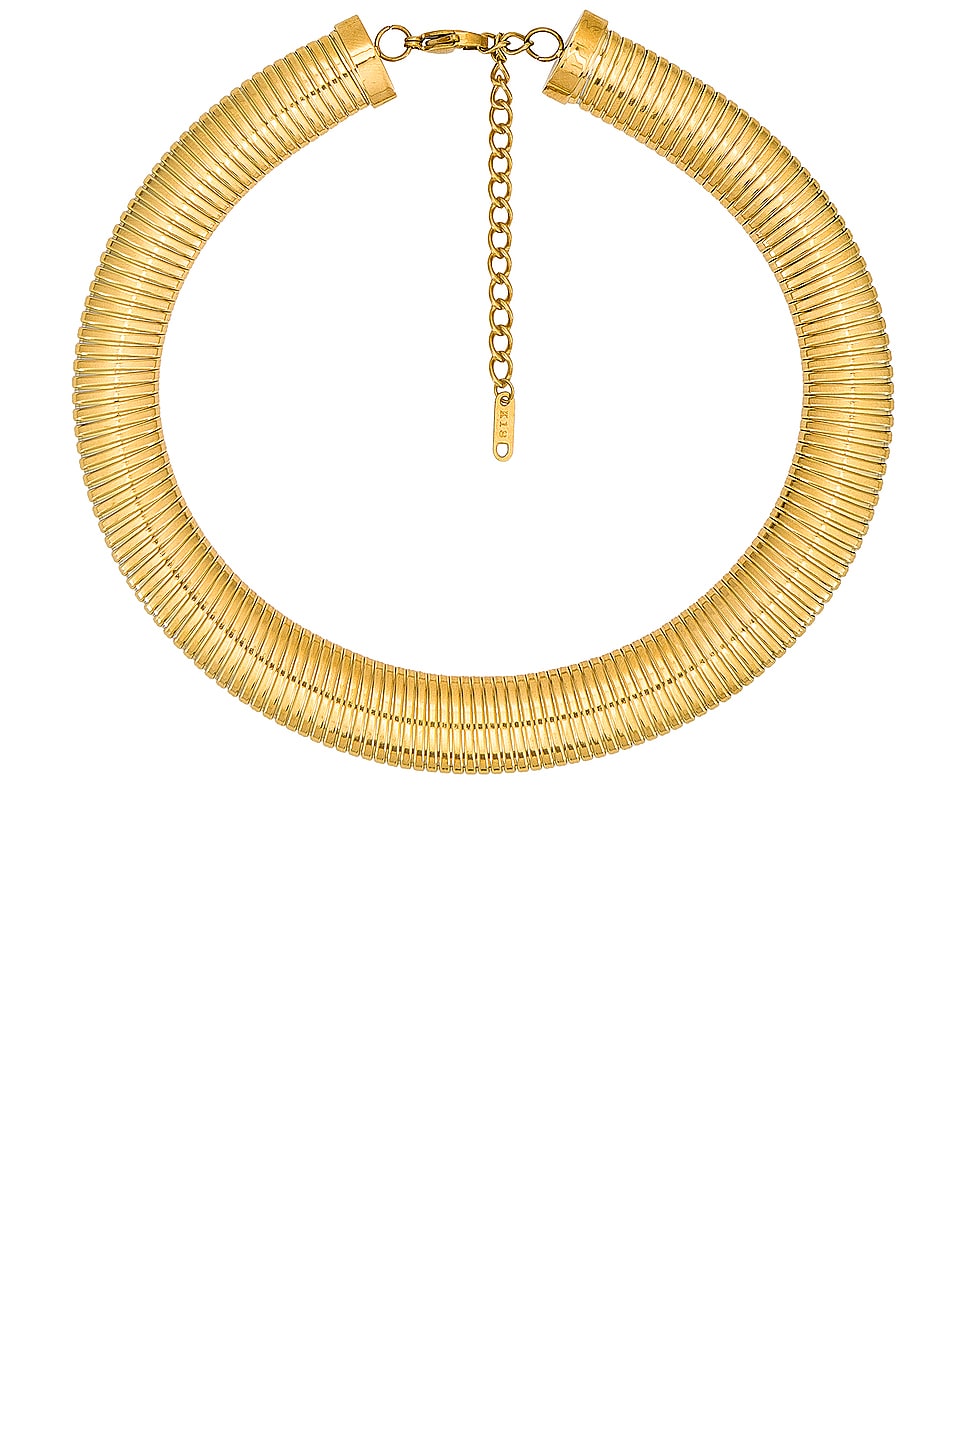 Image 1 of Jordan Road Jewelry Serpent Choker Necklace in 18k Gold Plated Brass